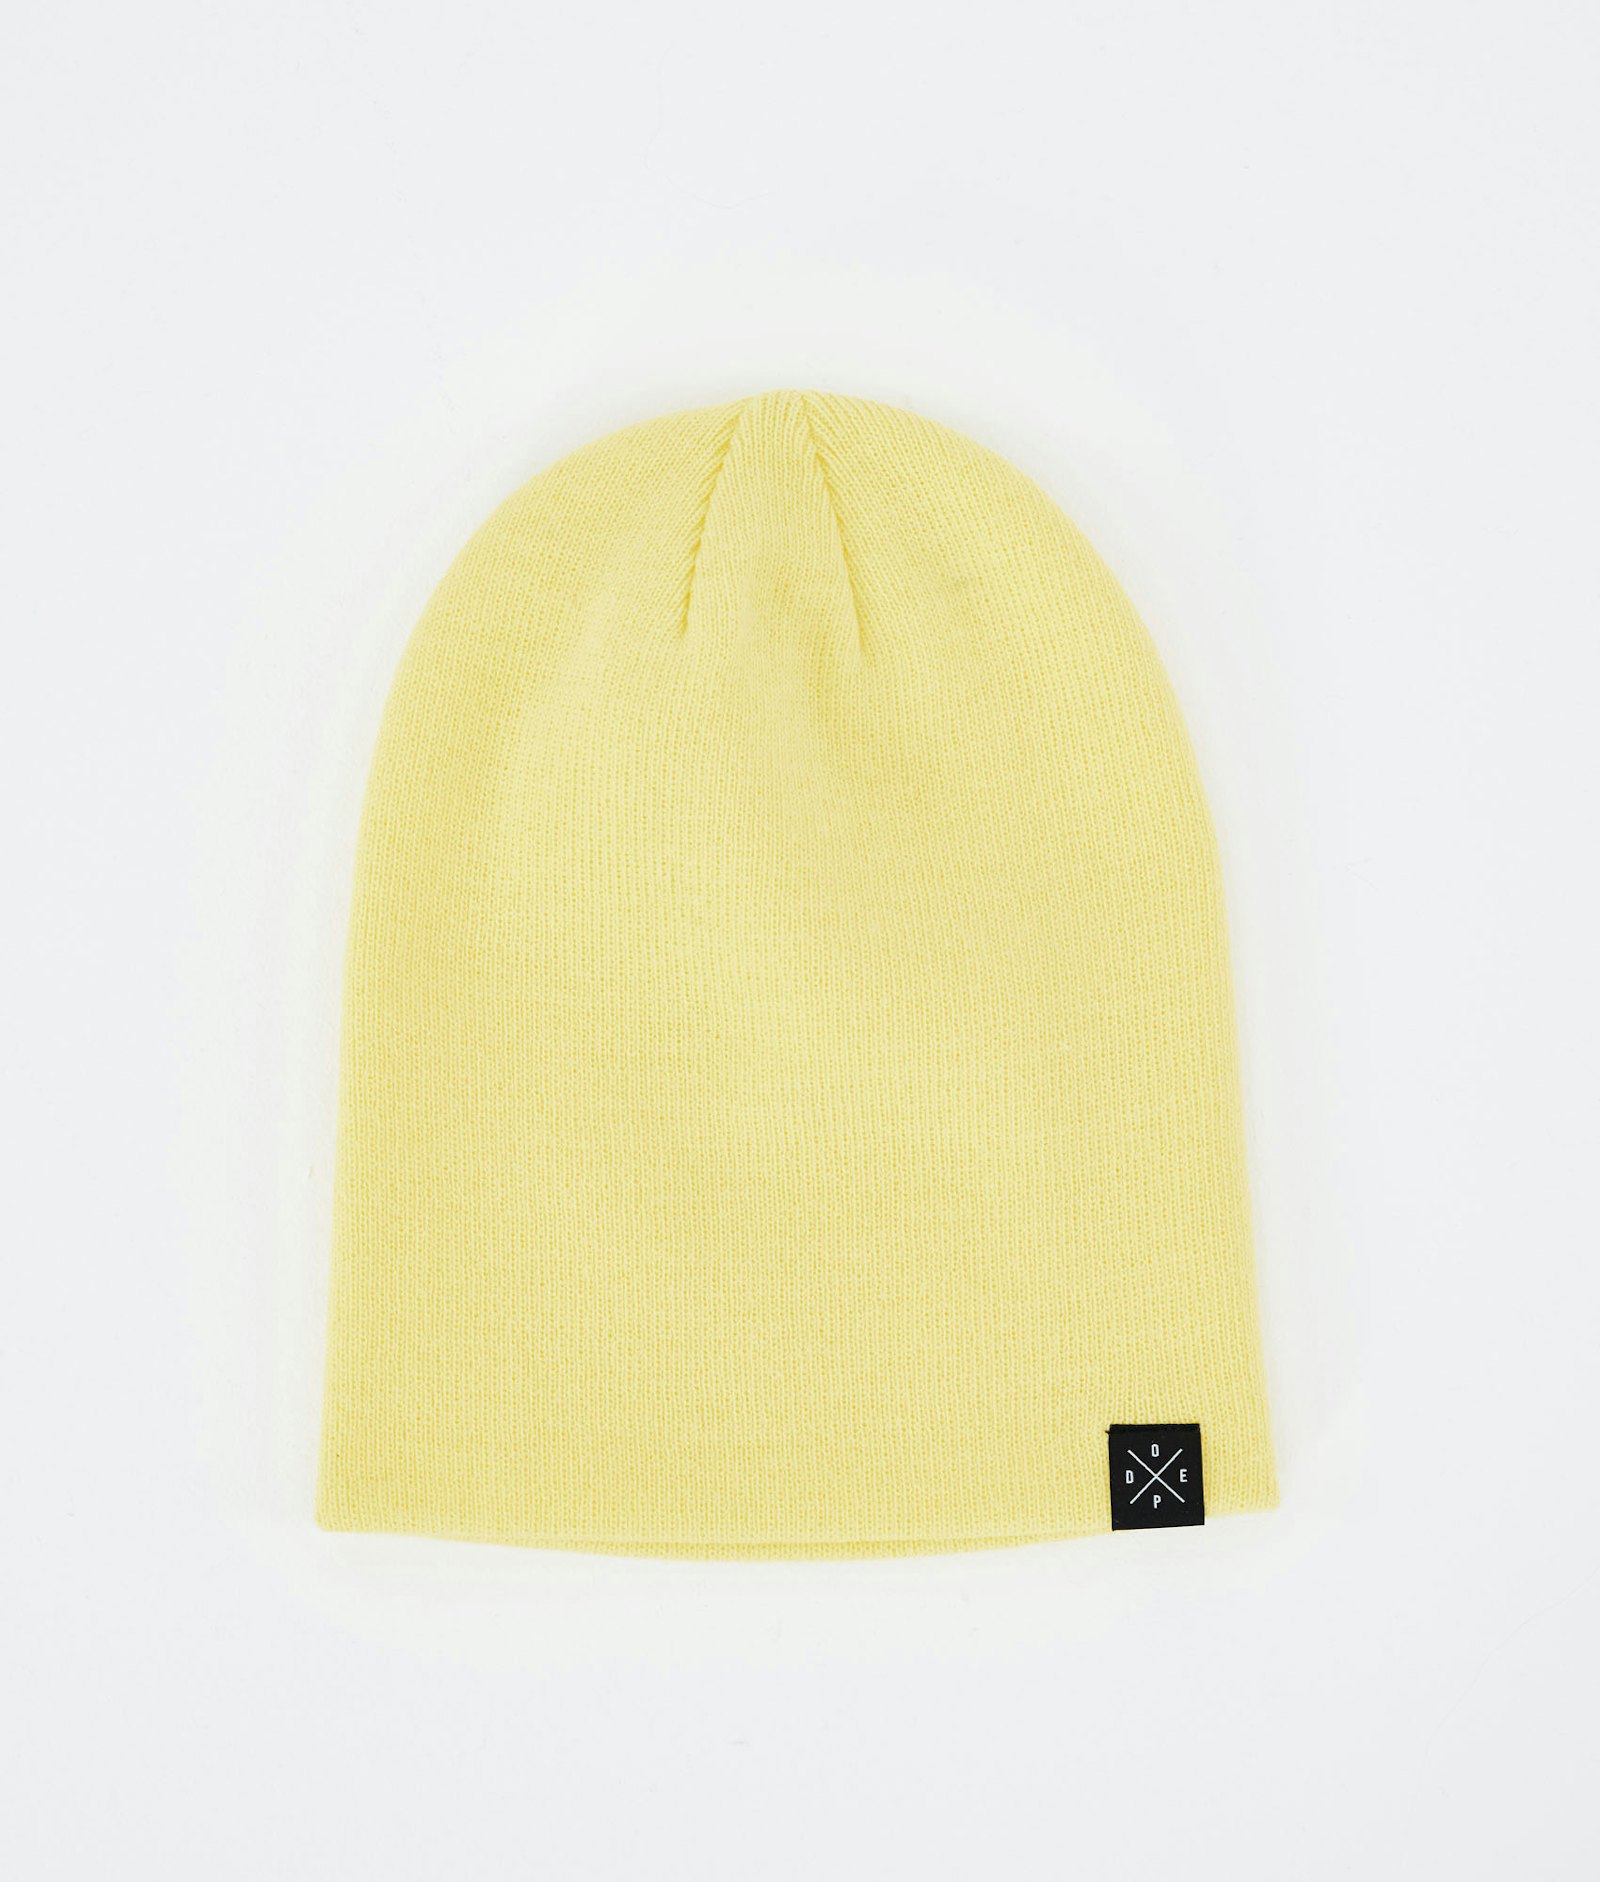 Dope Solitude 2021 Beanie Faded Yellow, Image 2 of 4